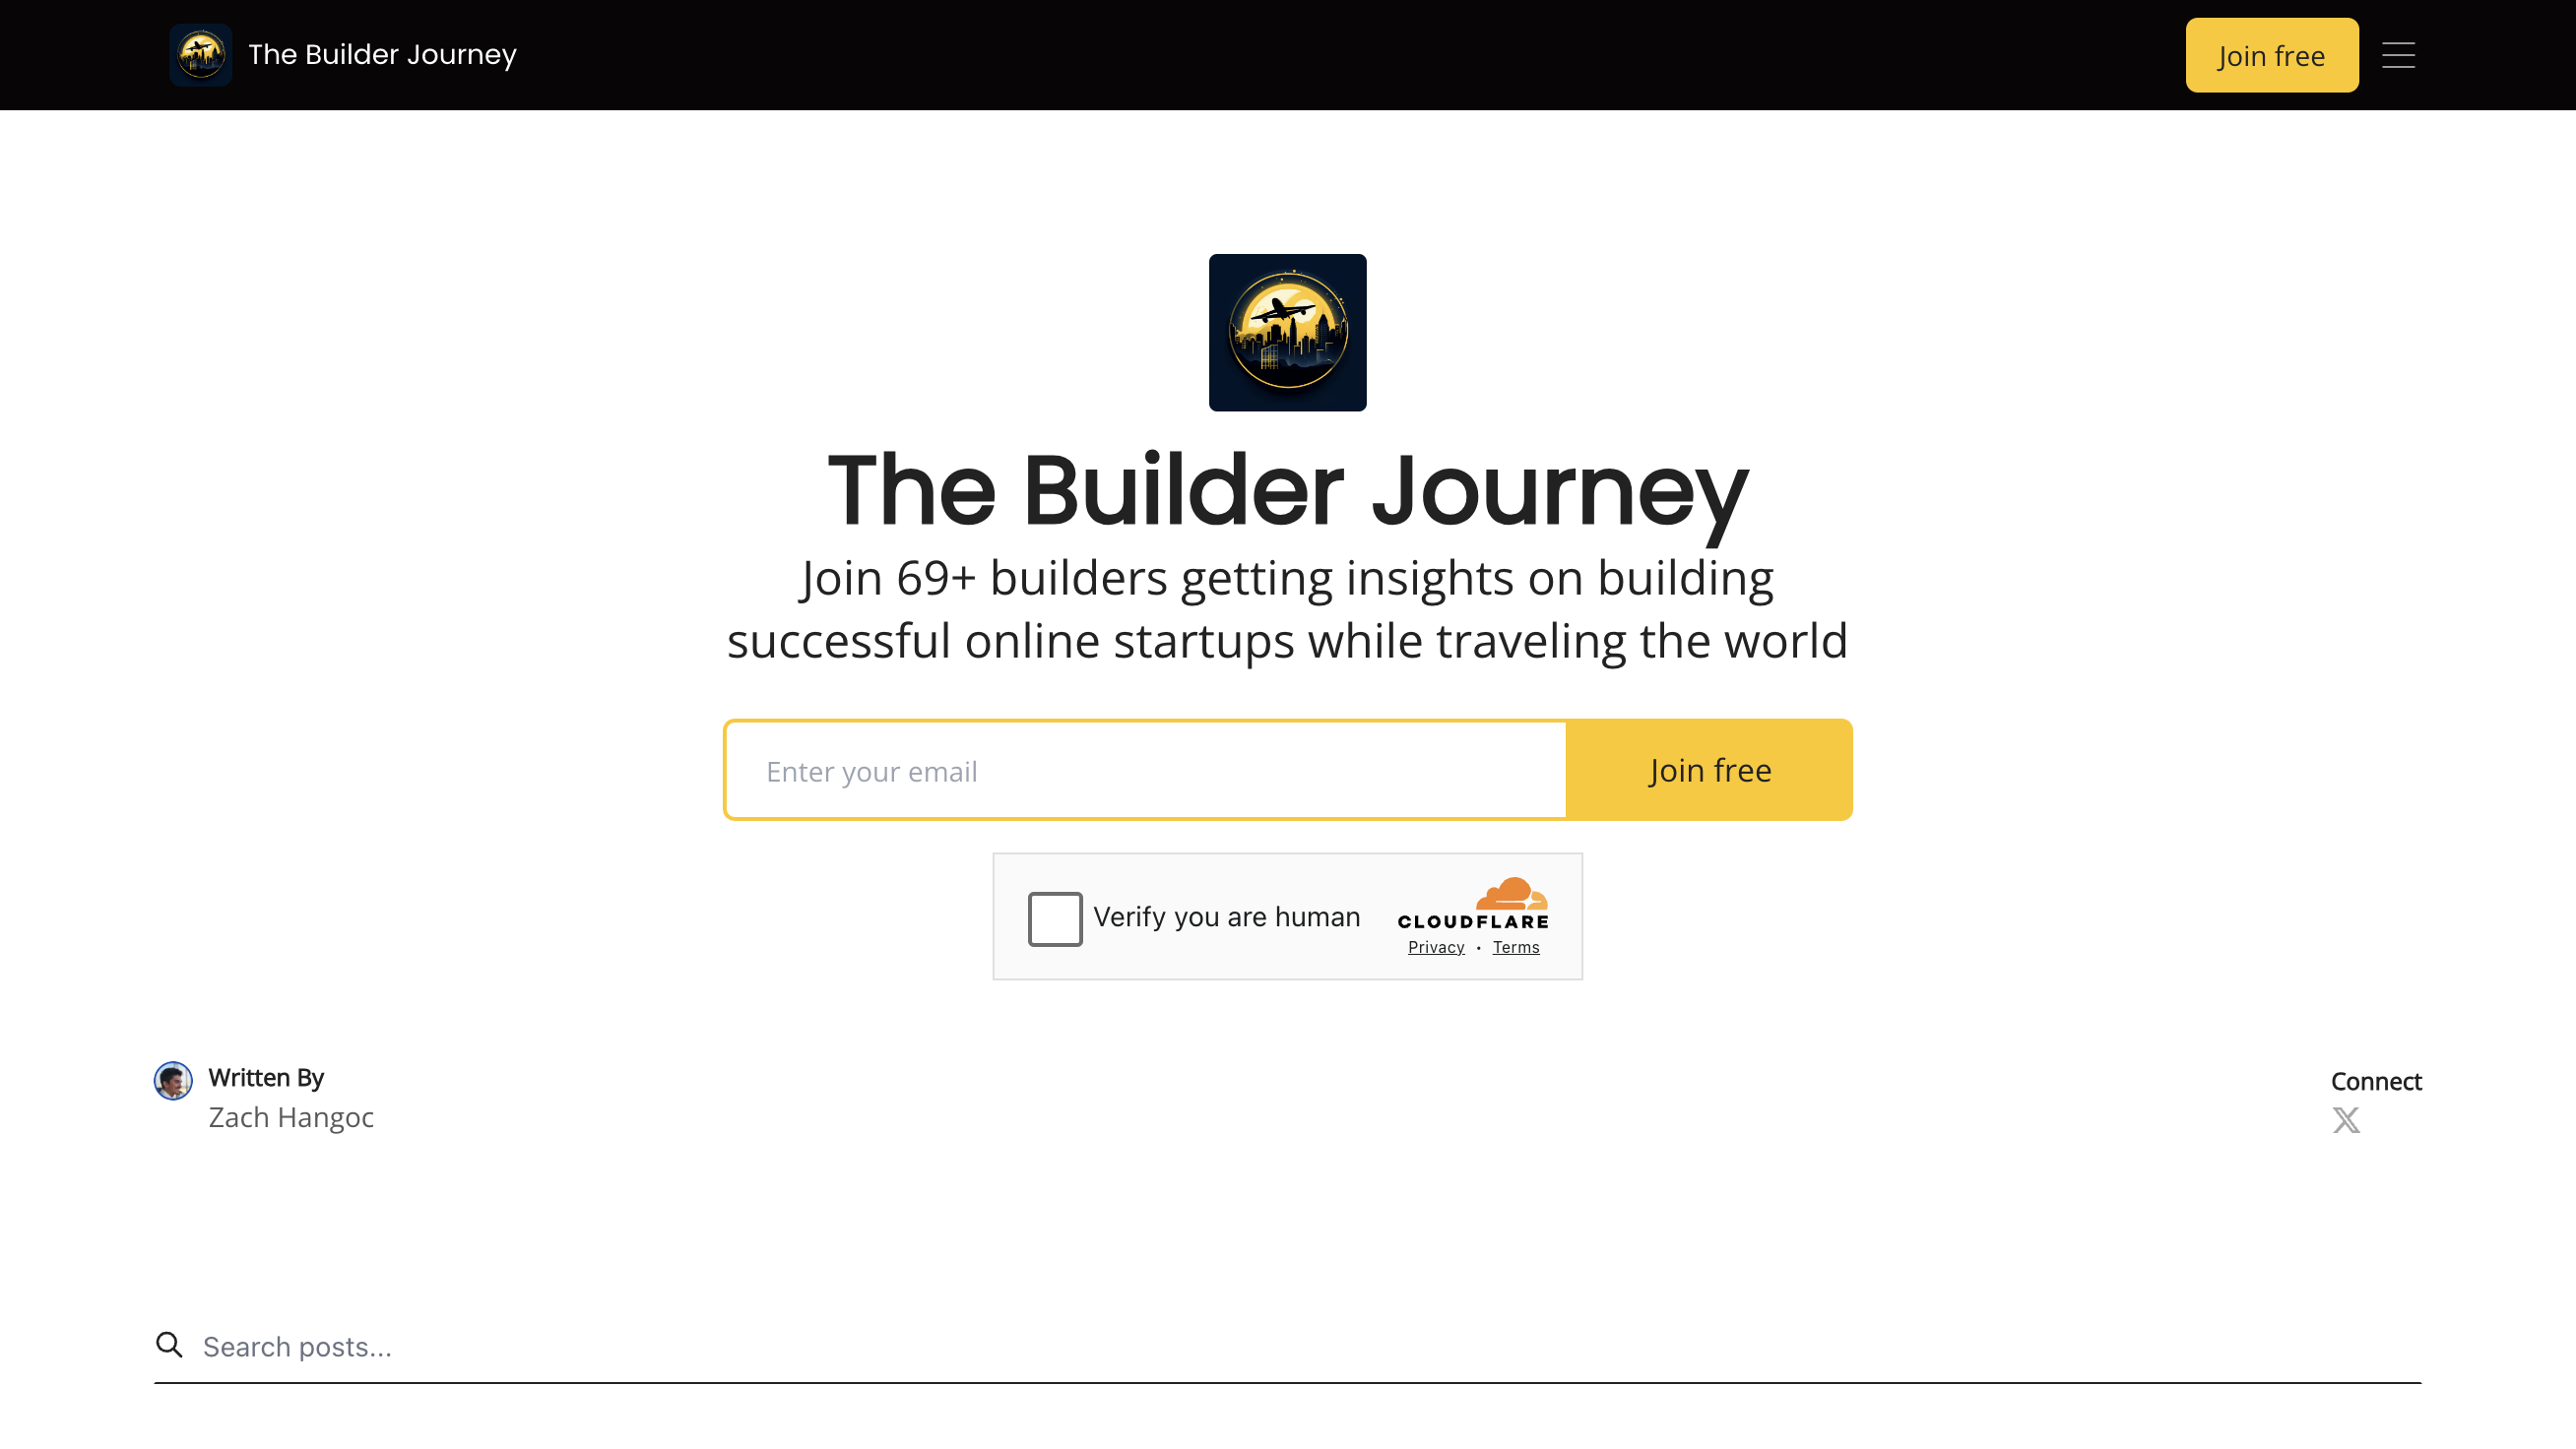 The Builder Journey homepage